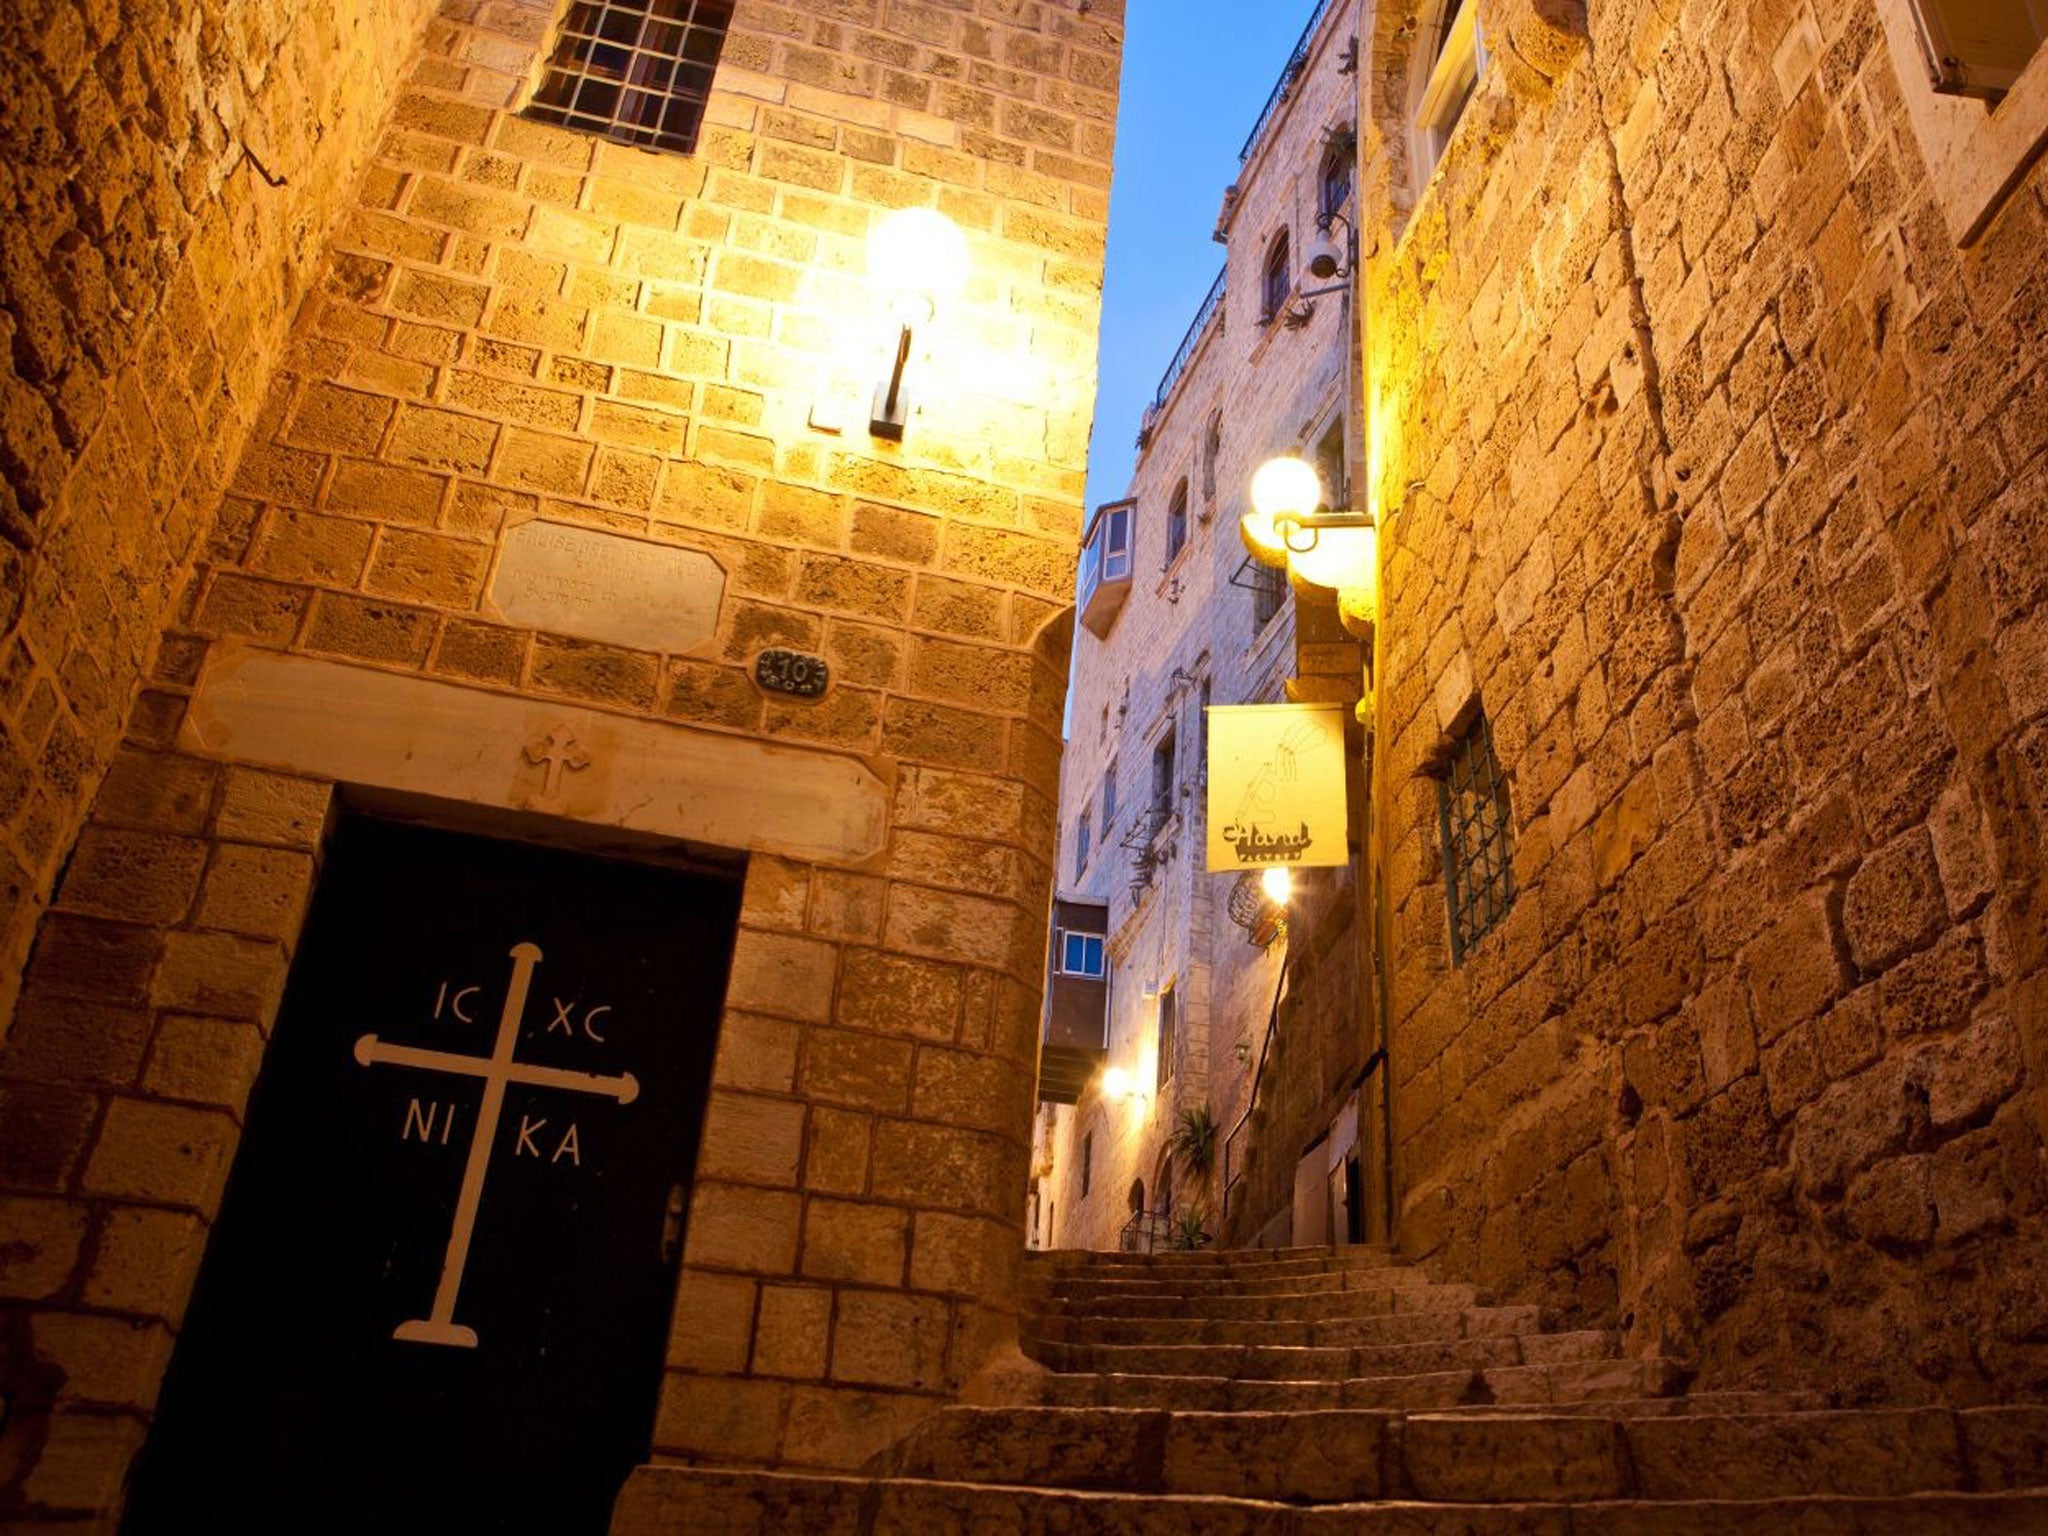 Biblical passage: Parts of Old Jaffa date back 5,000 years